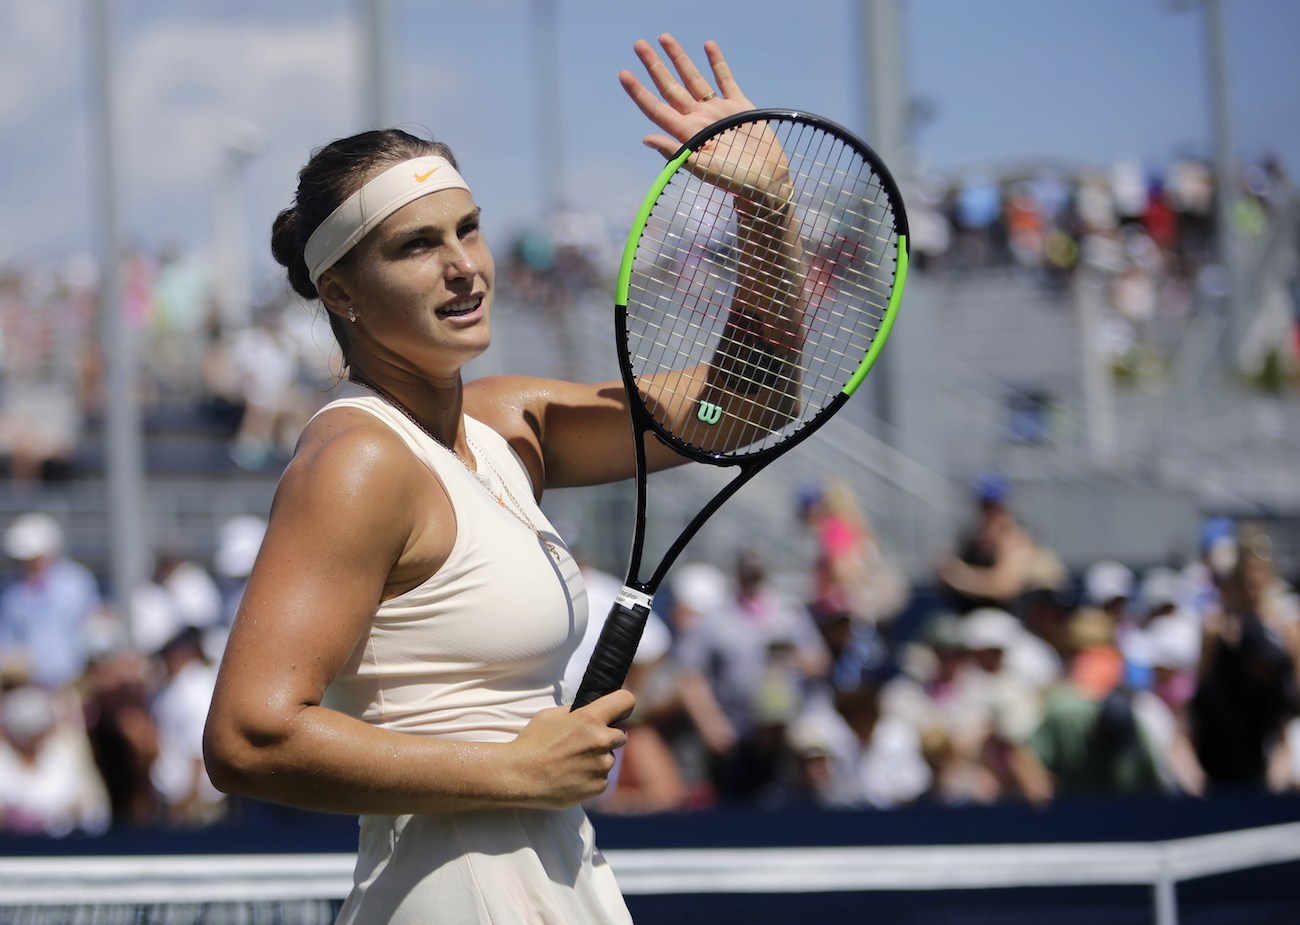 Sabalenka's simple, power game carries her at the US Open